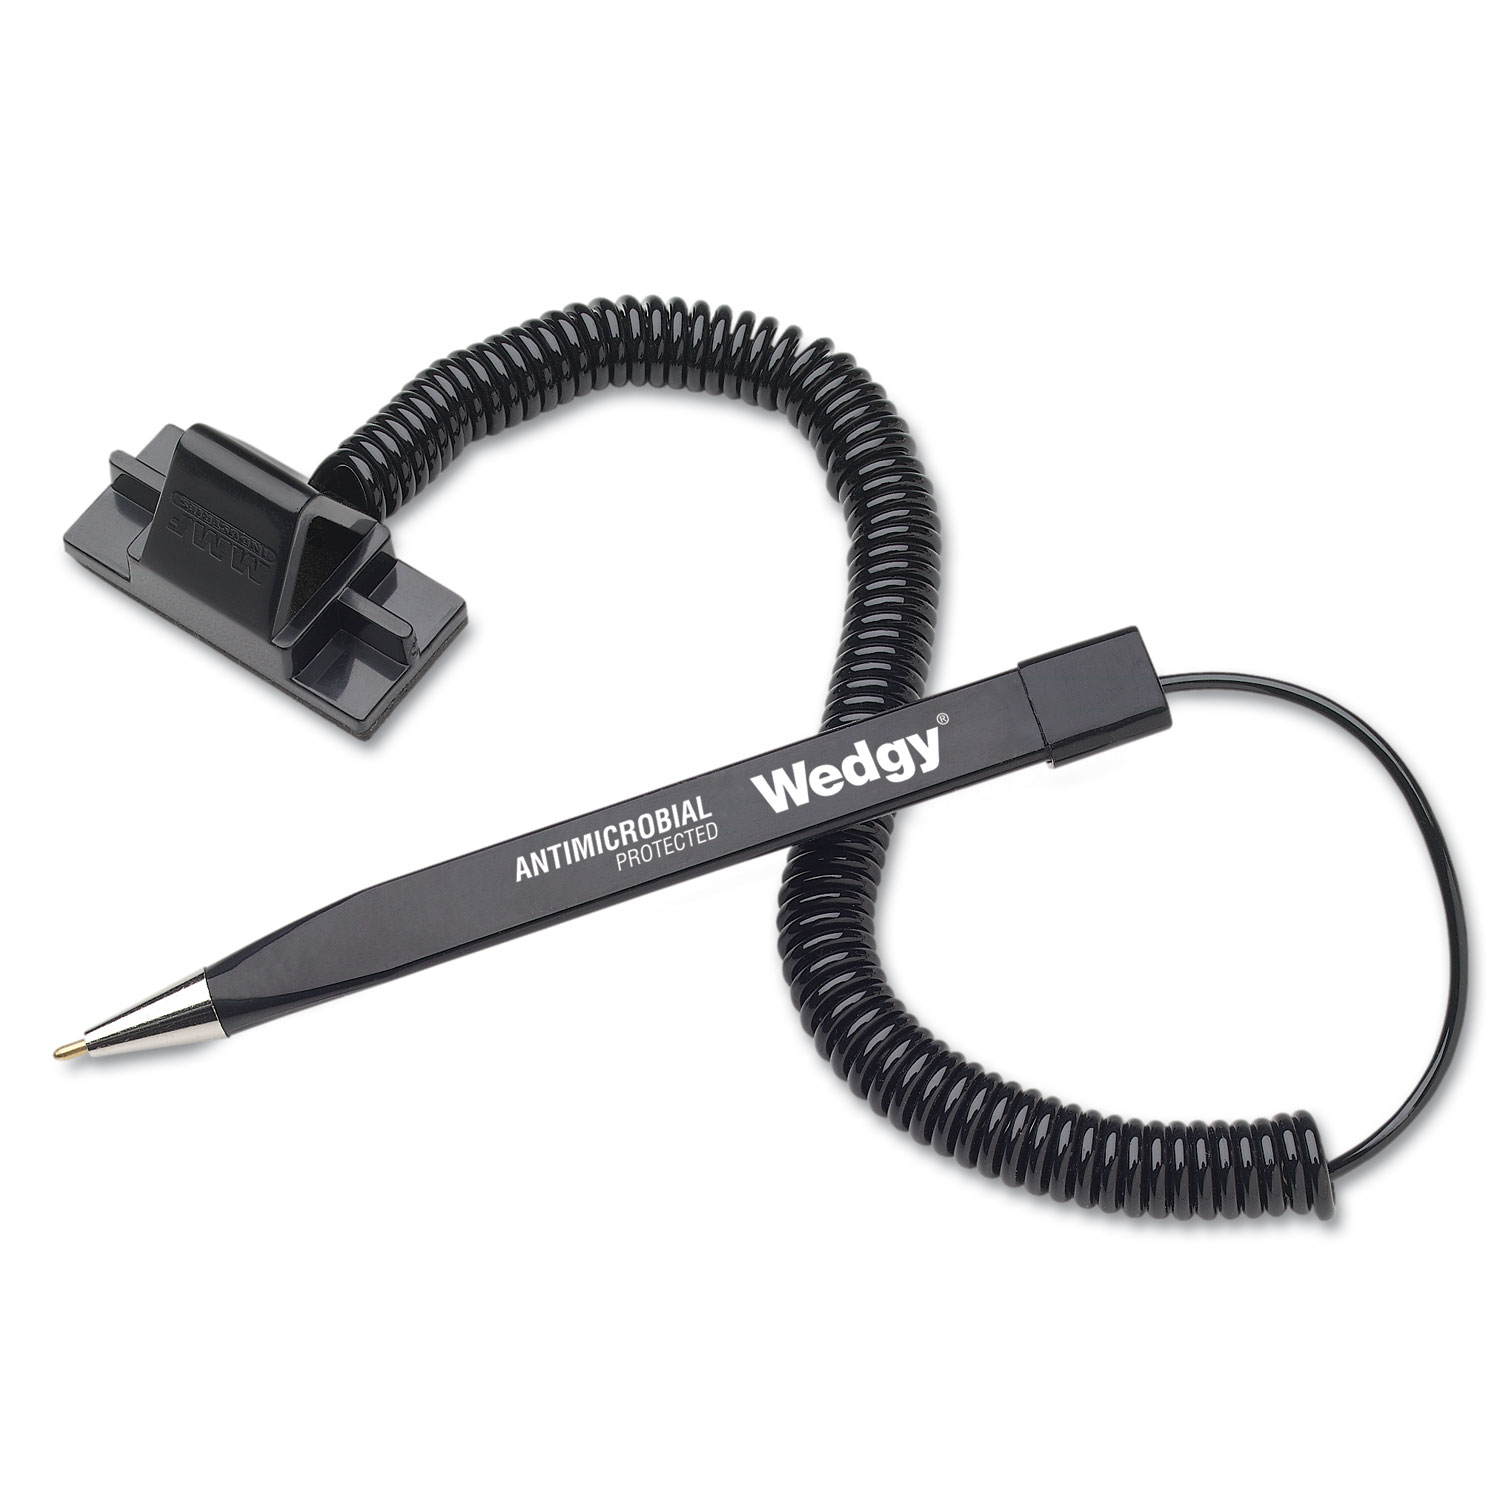  MMF Industries 28608 Wedgy Antimicrobial Ballpoint Counter Pen w/Scabbard, 1mm, Blue Ink, Black Barrel (MMF28608) 